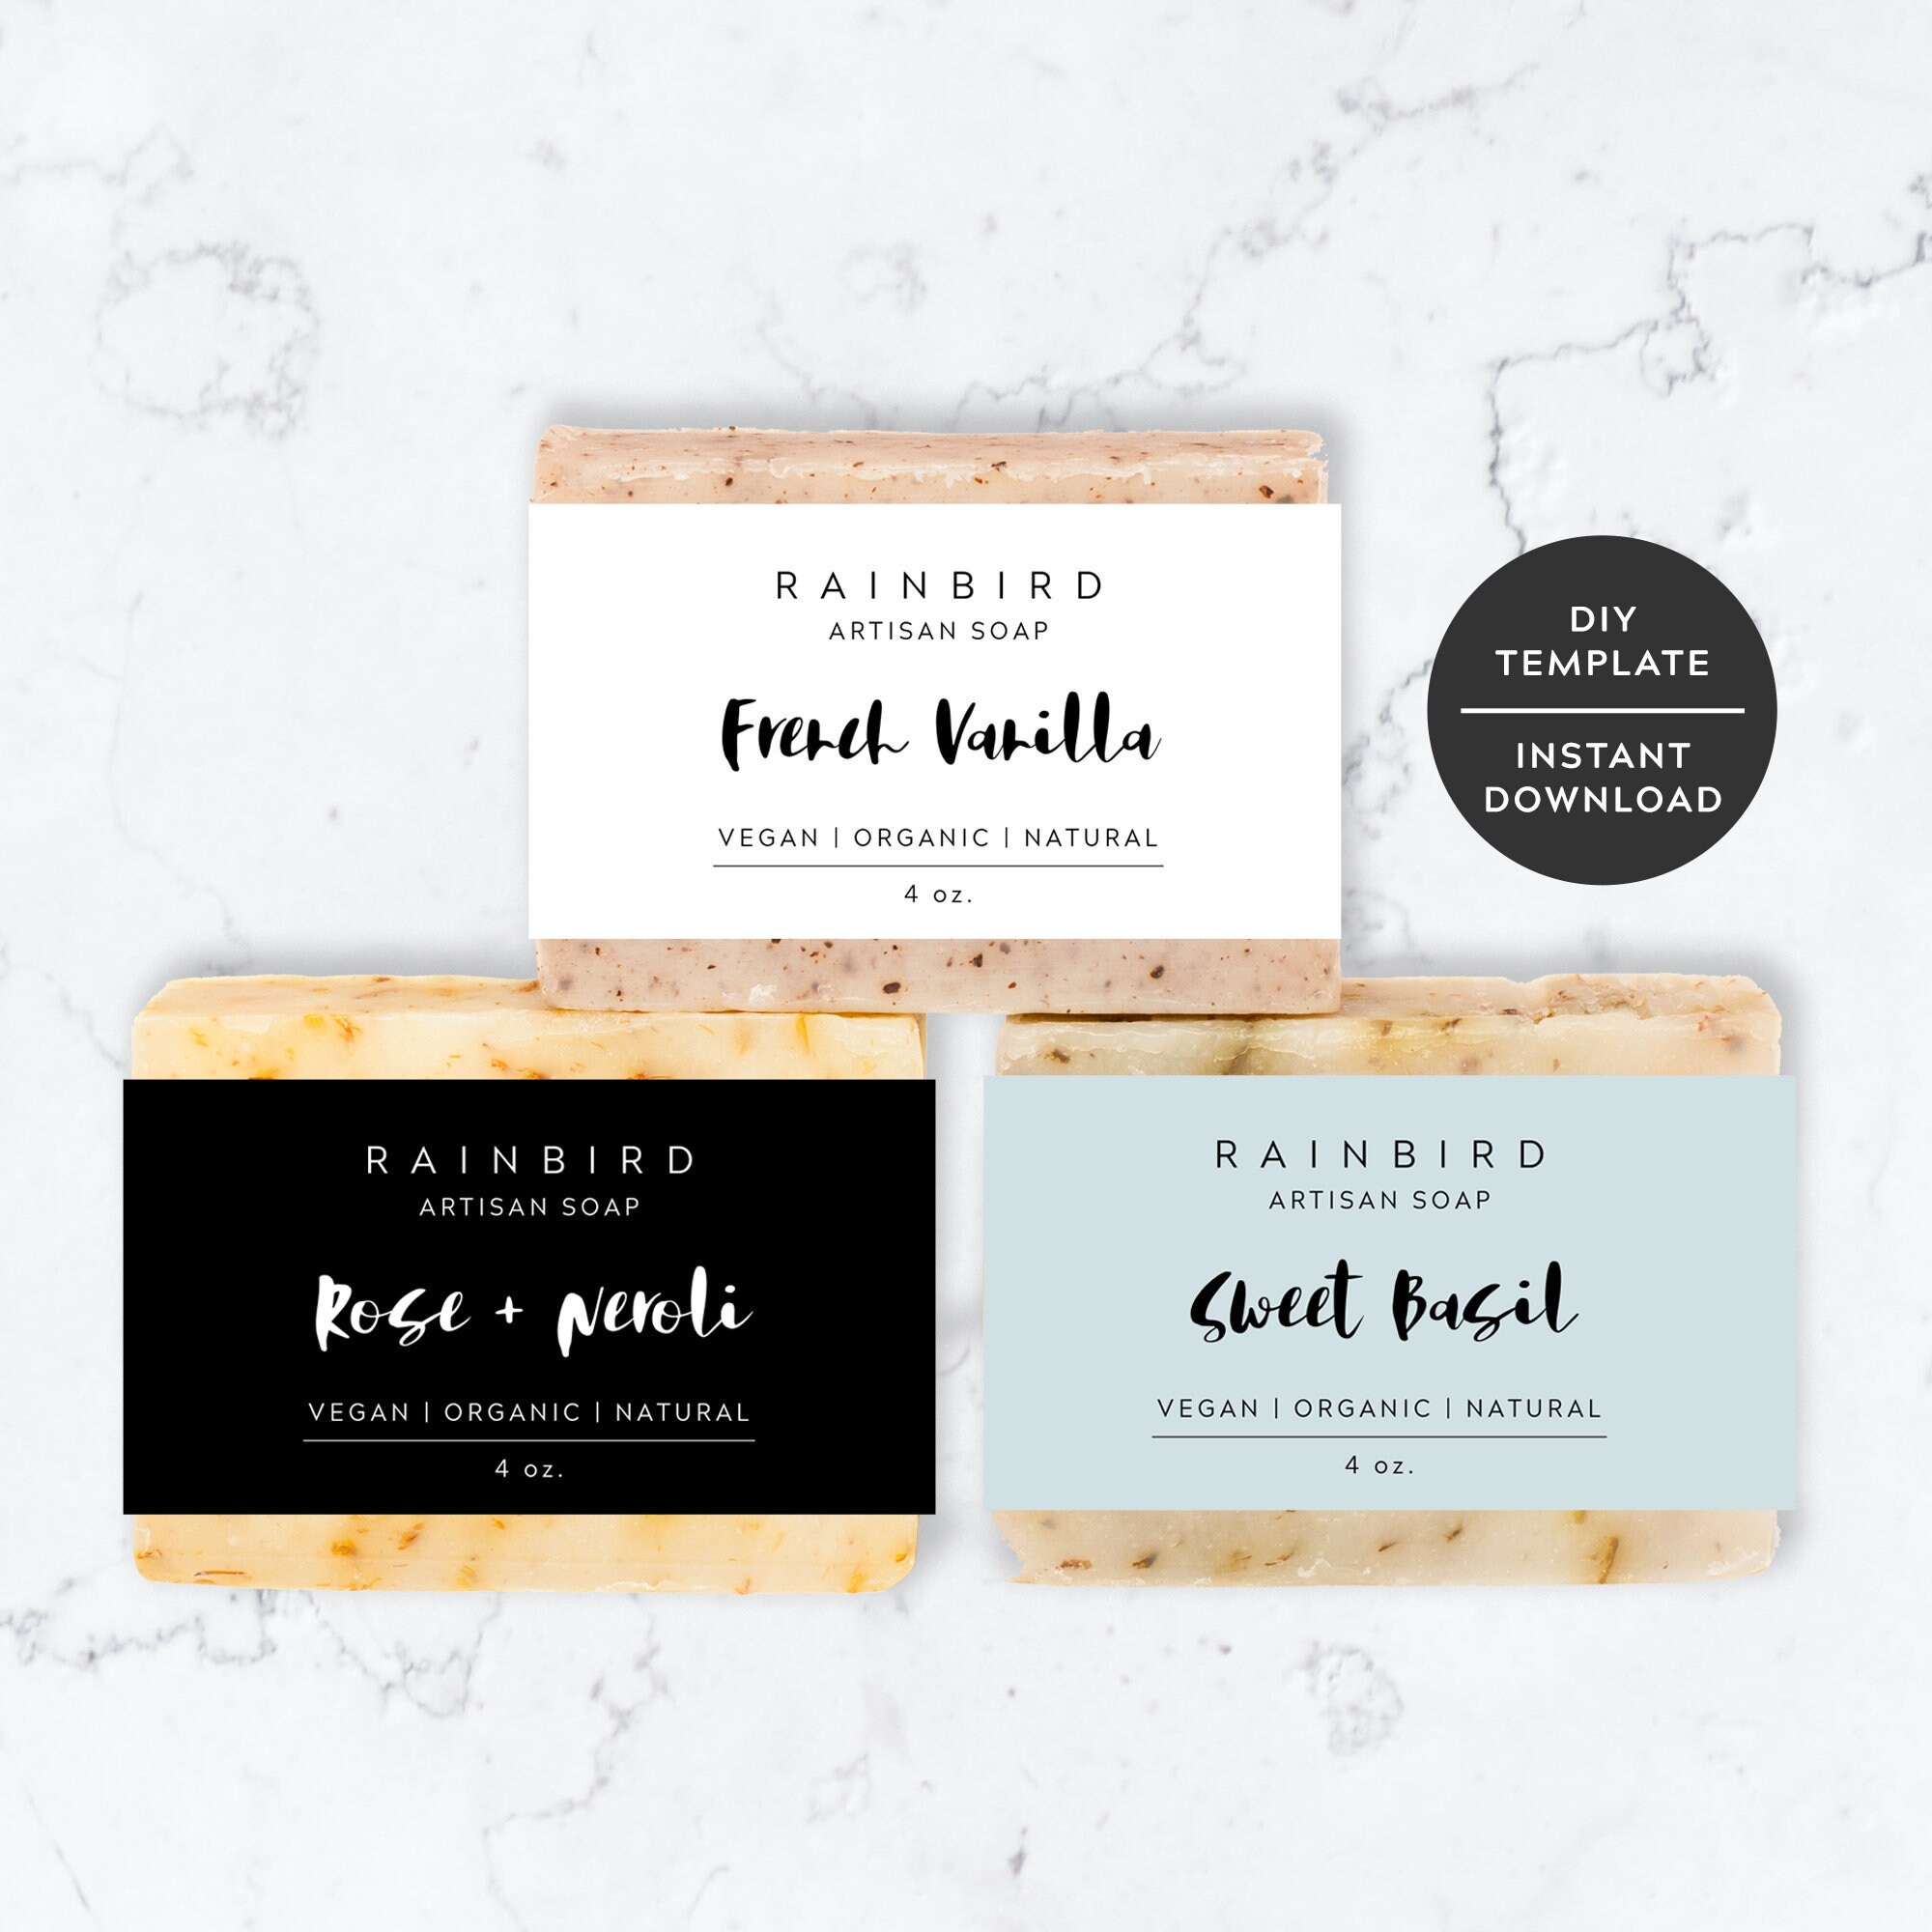 Rectangle Product Label Template Printable Minimalist Candle